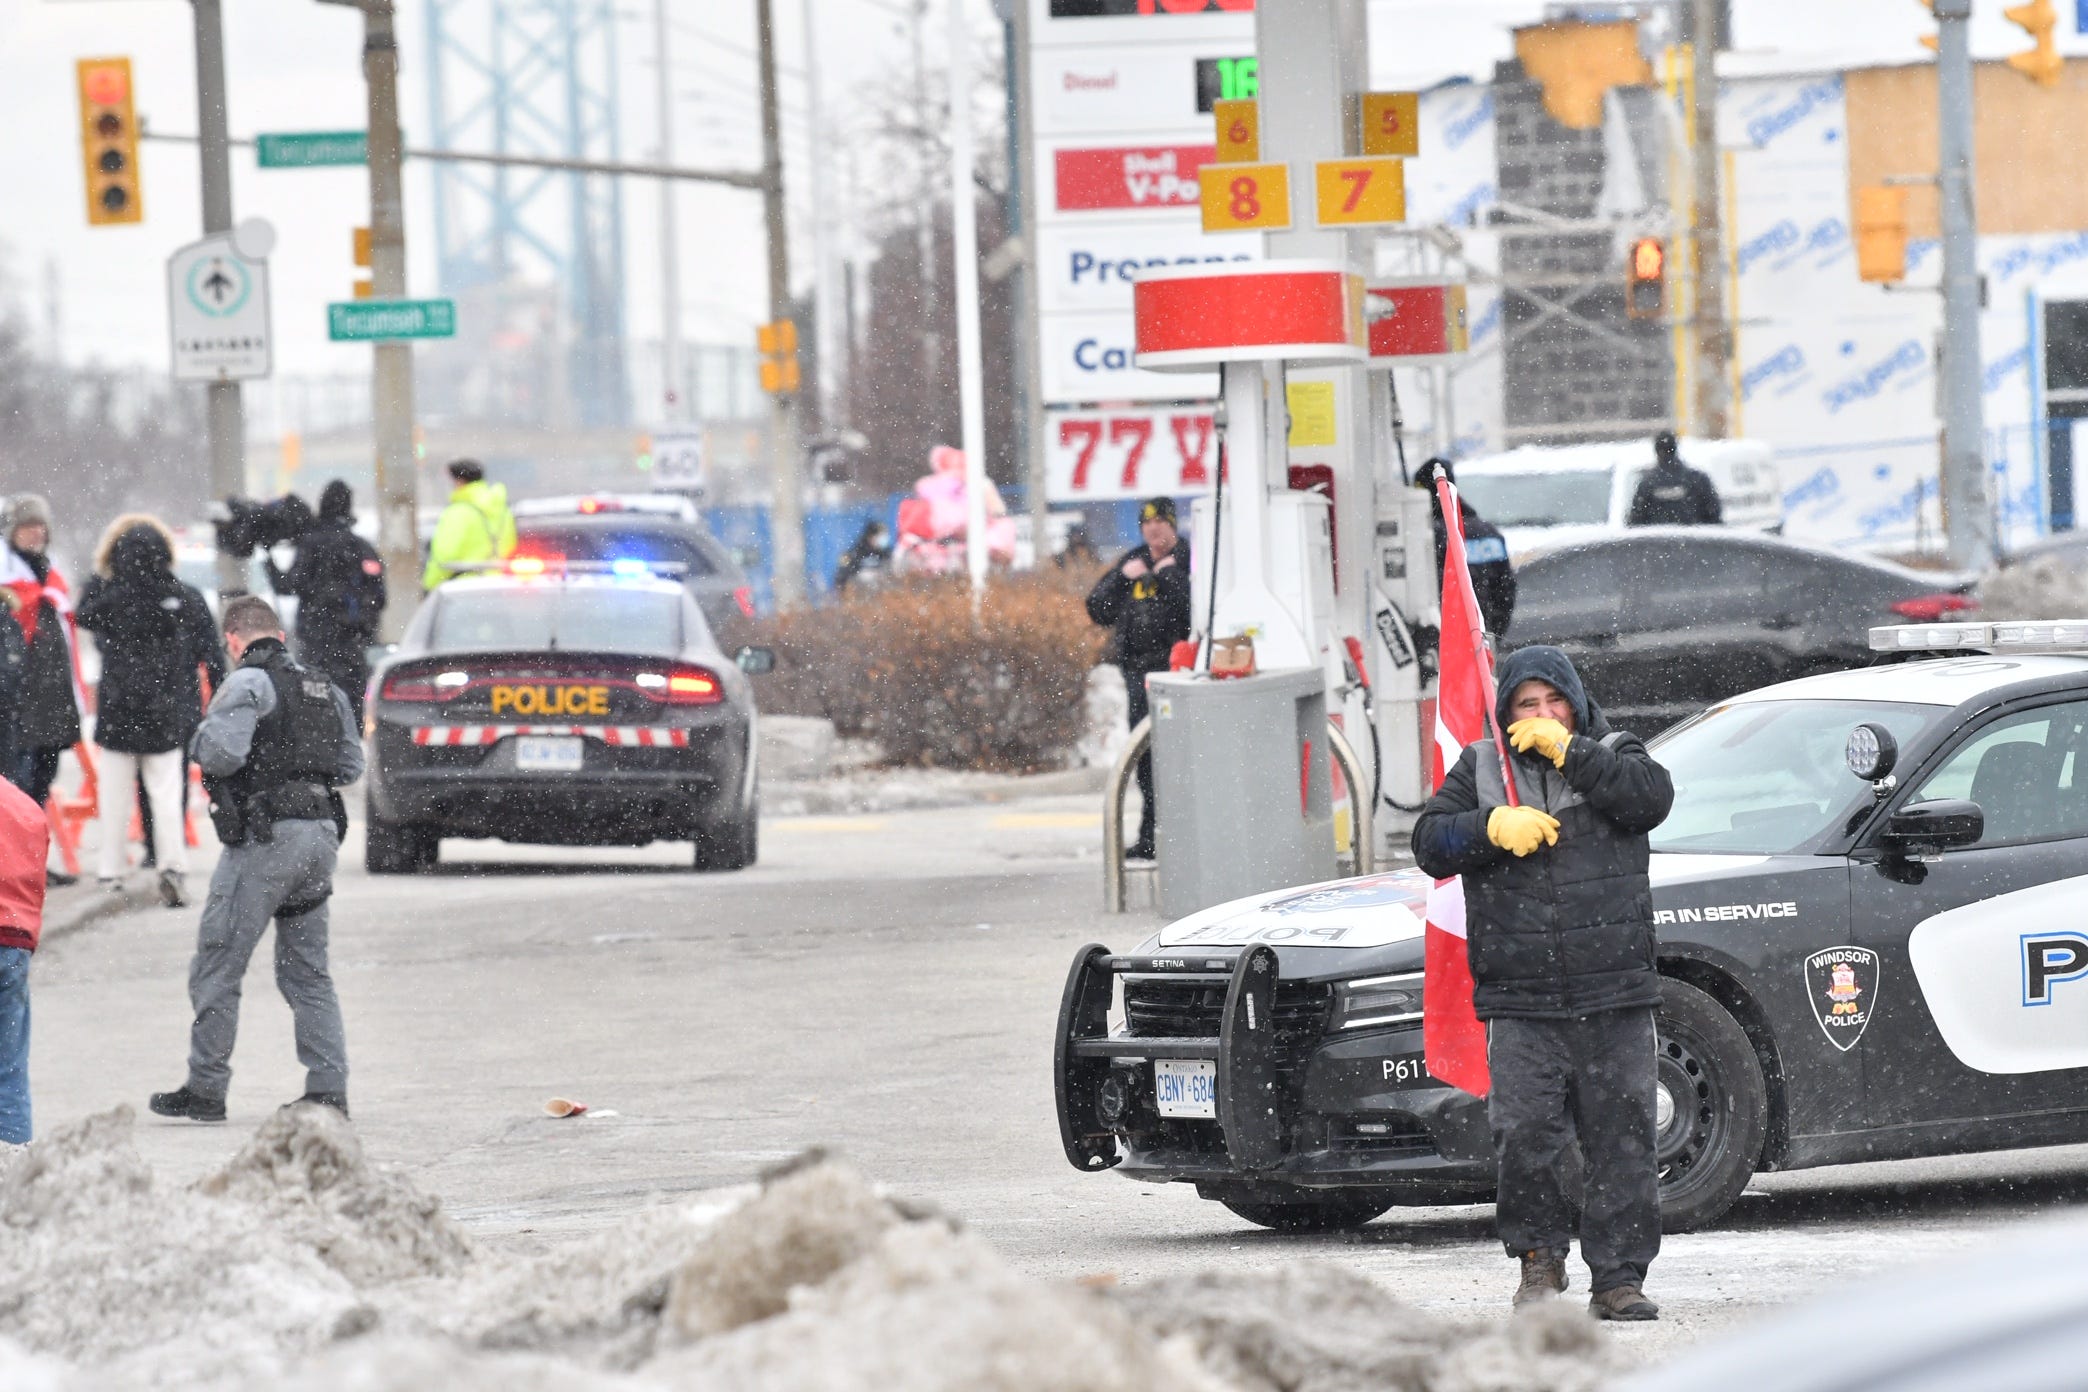 Windsor and London Police officers inform people parked in a shopping area parking lot on Huron Church Road that they cannot stay parked unless they are using the businesses and will be towed. This is not far from Ambassador Bridge in Windsor, Ontario, on Feb. 13, 2022.